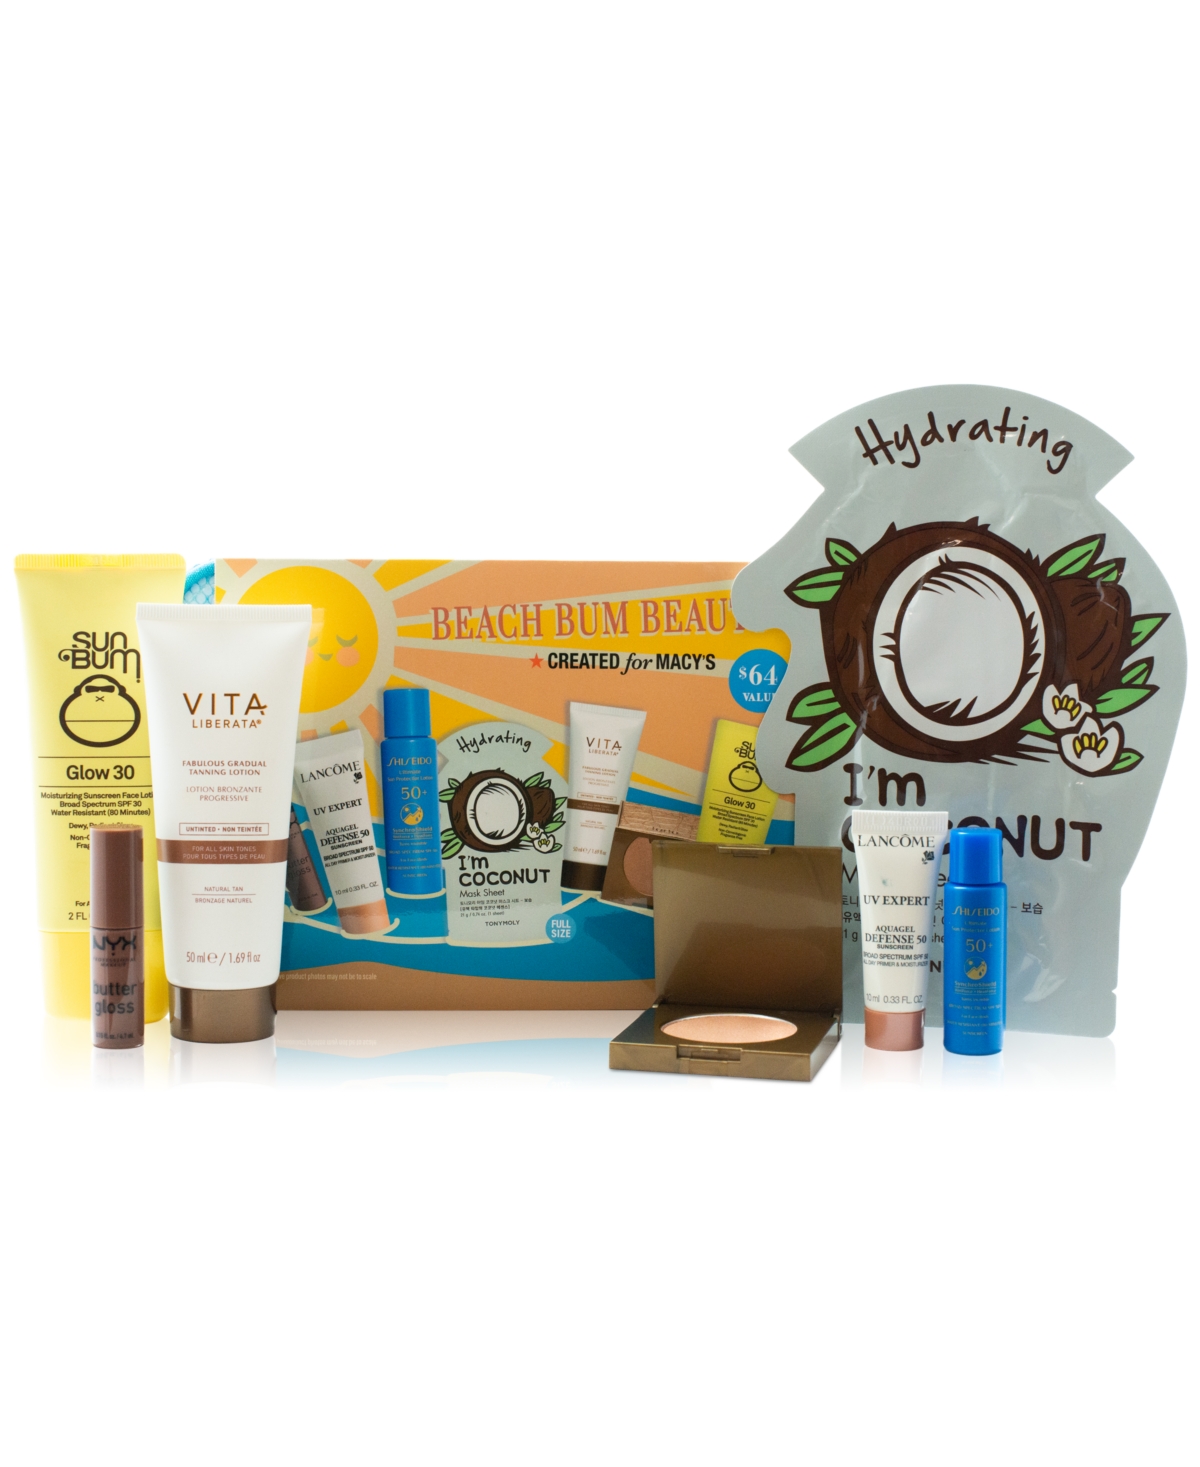 8-Piece Beach Bum Beauty Set w/ 2-Oz Sun Bum SPF 30 Glow Sunscreen Face Lotion & More $17.50 + Free Store Pickup at Macy's or FS on $25+